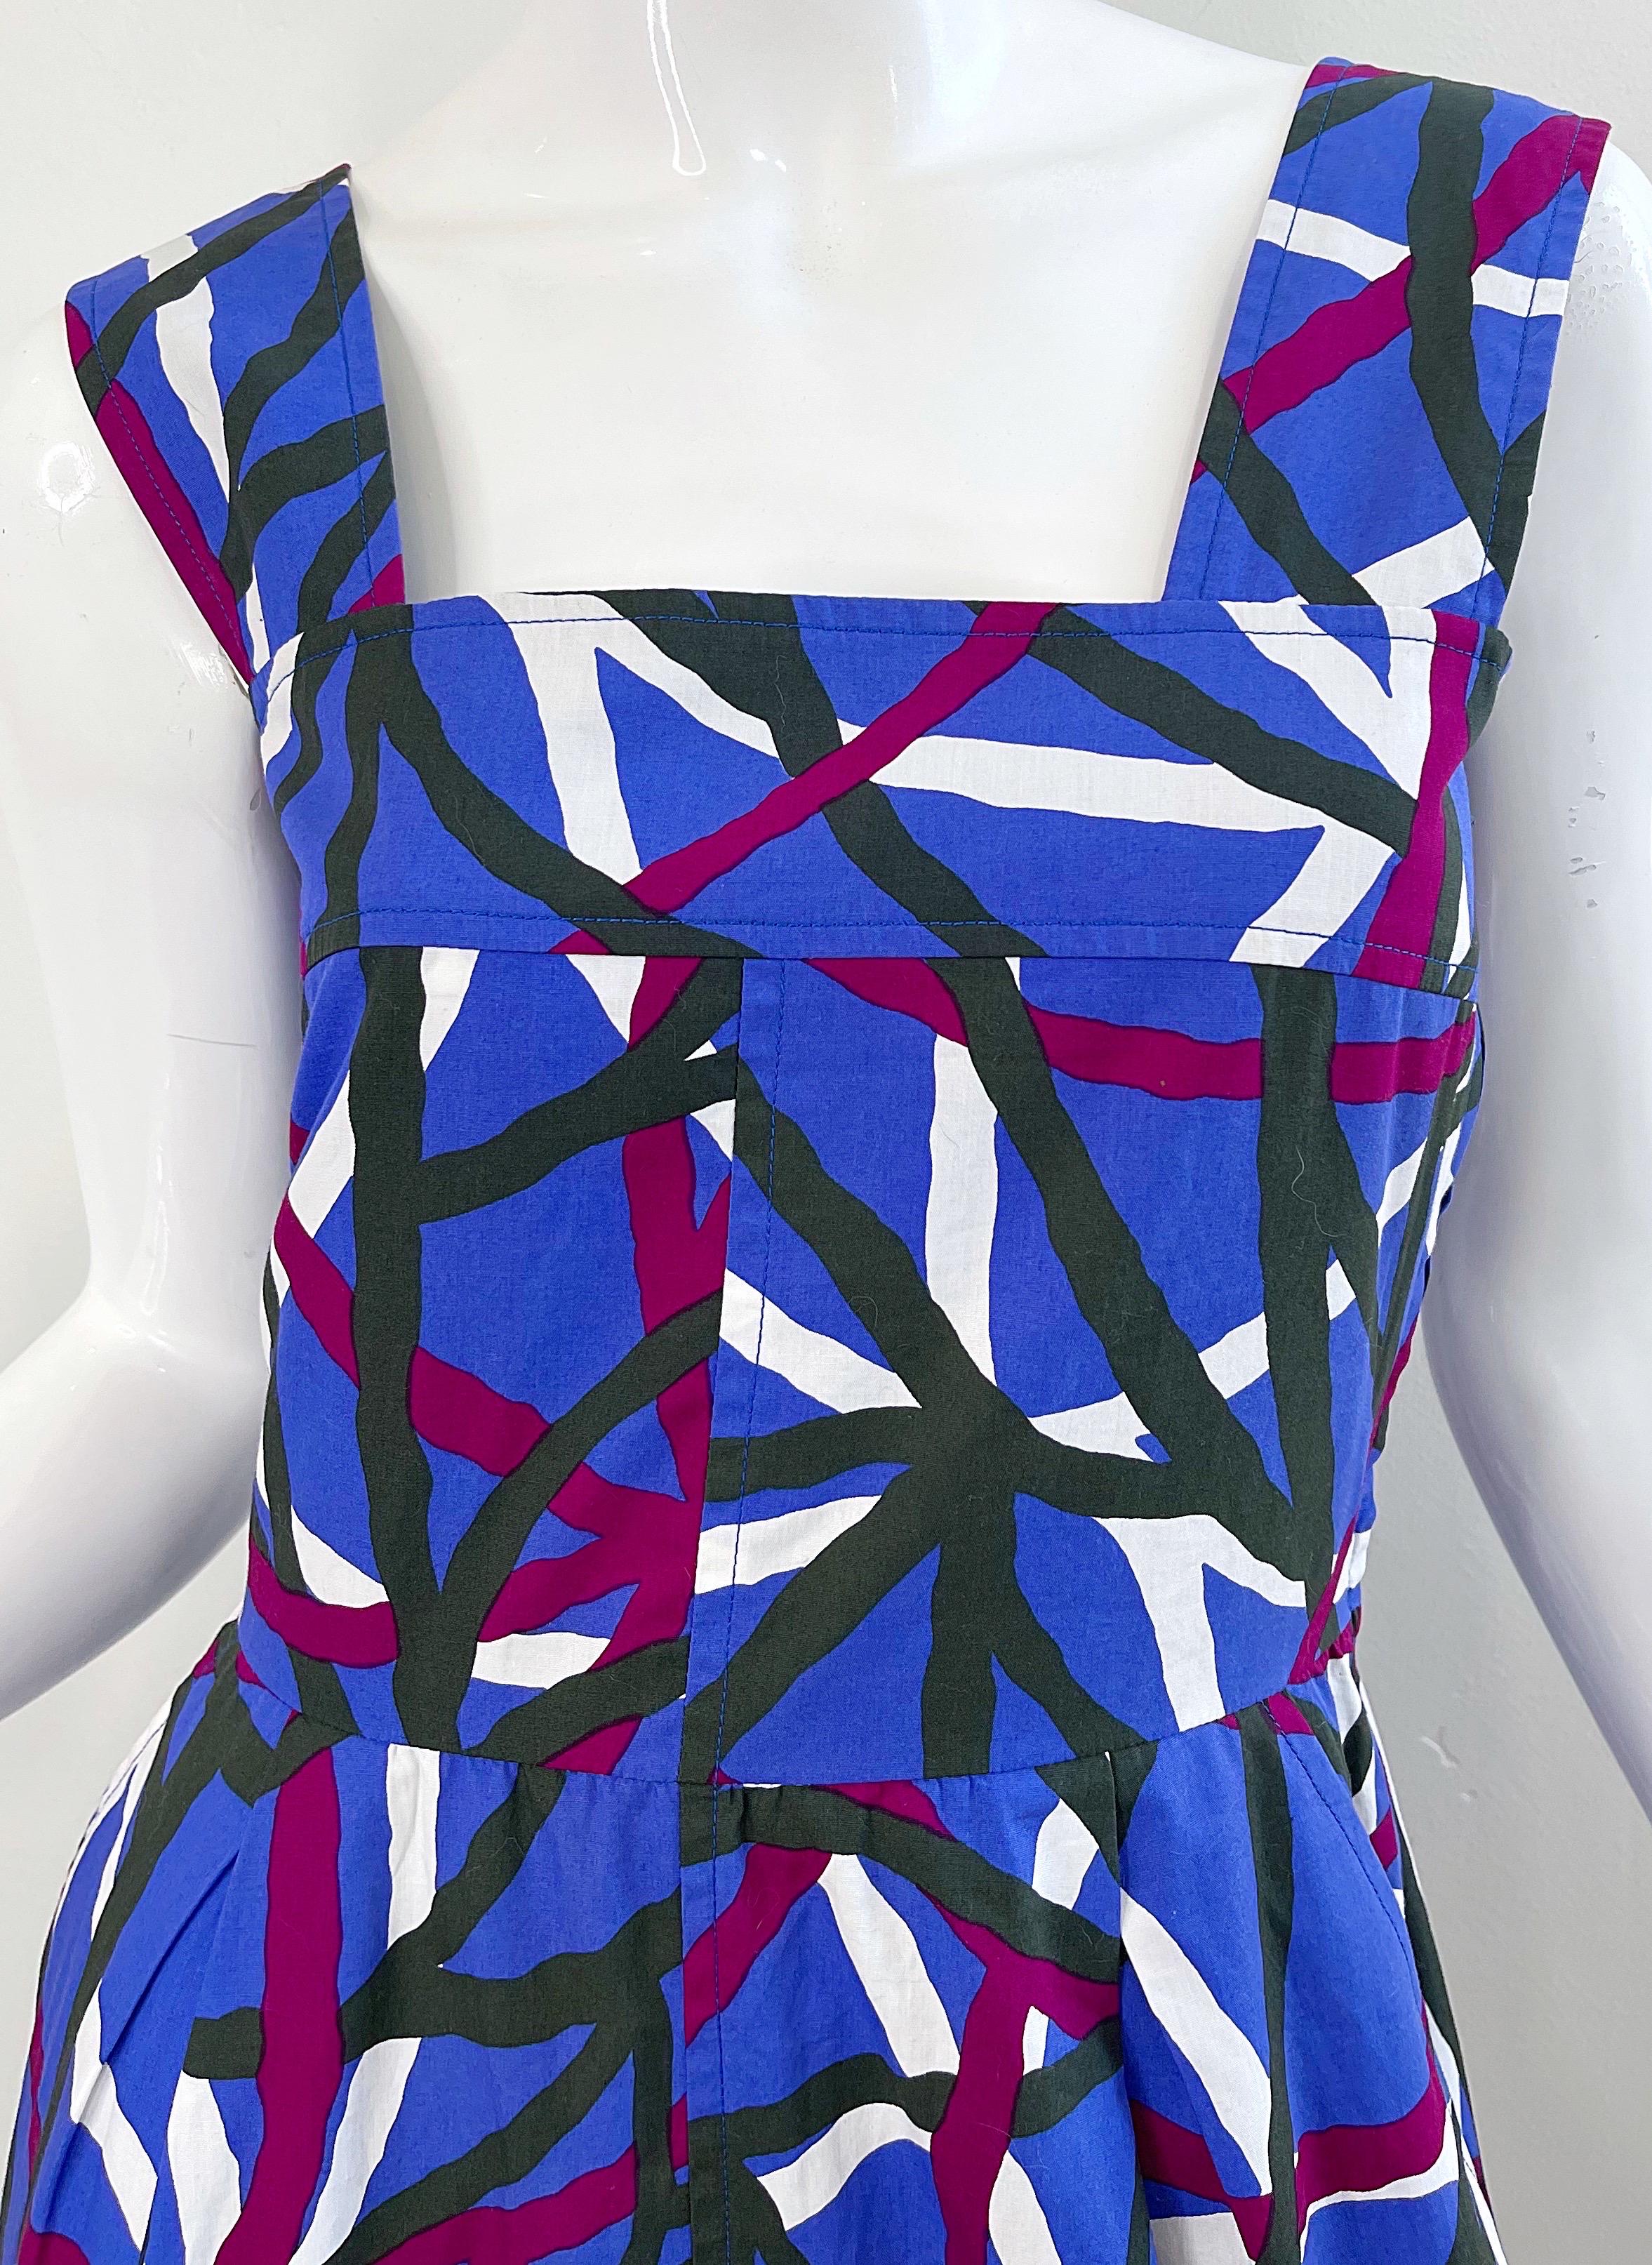 Yves Saint Laurent 1970s YSL Graffiti Print Purple Cotton Vintage 70s Dress In Excellent Condition For Sale In San Diego, CA